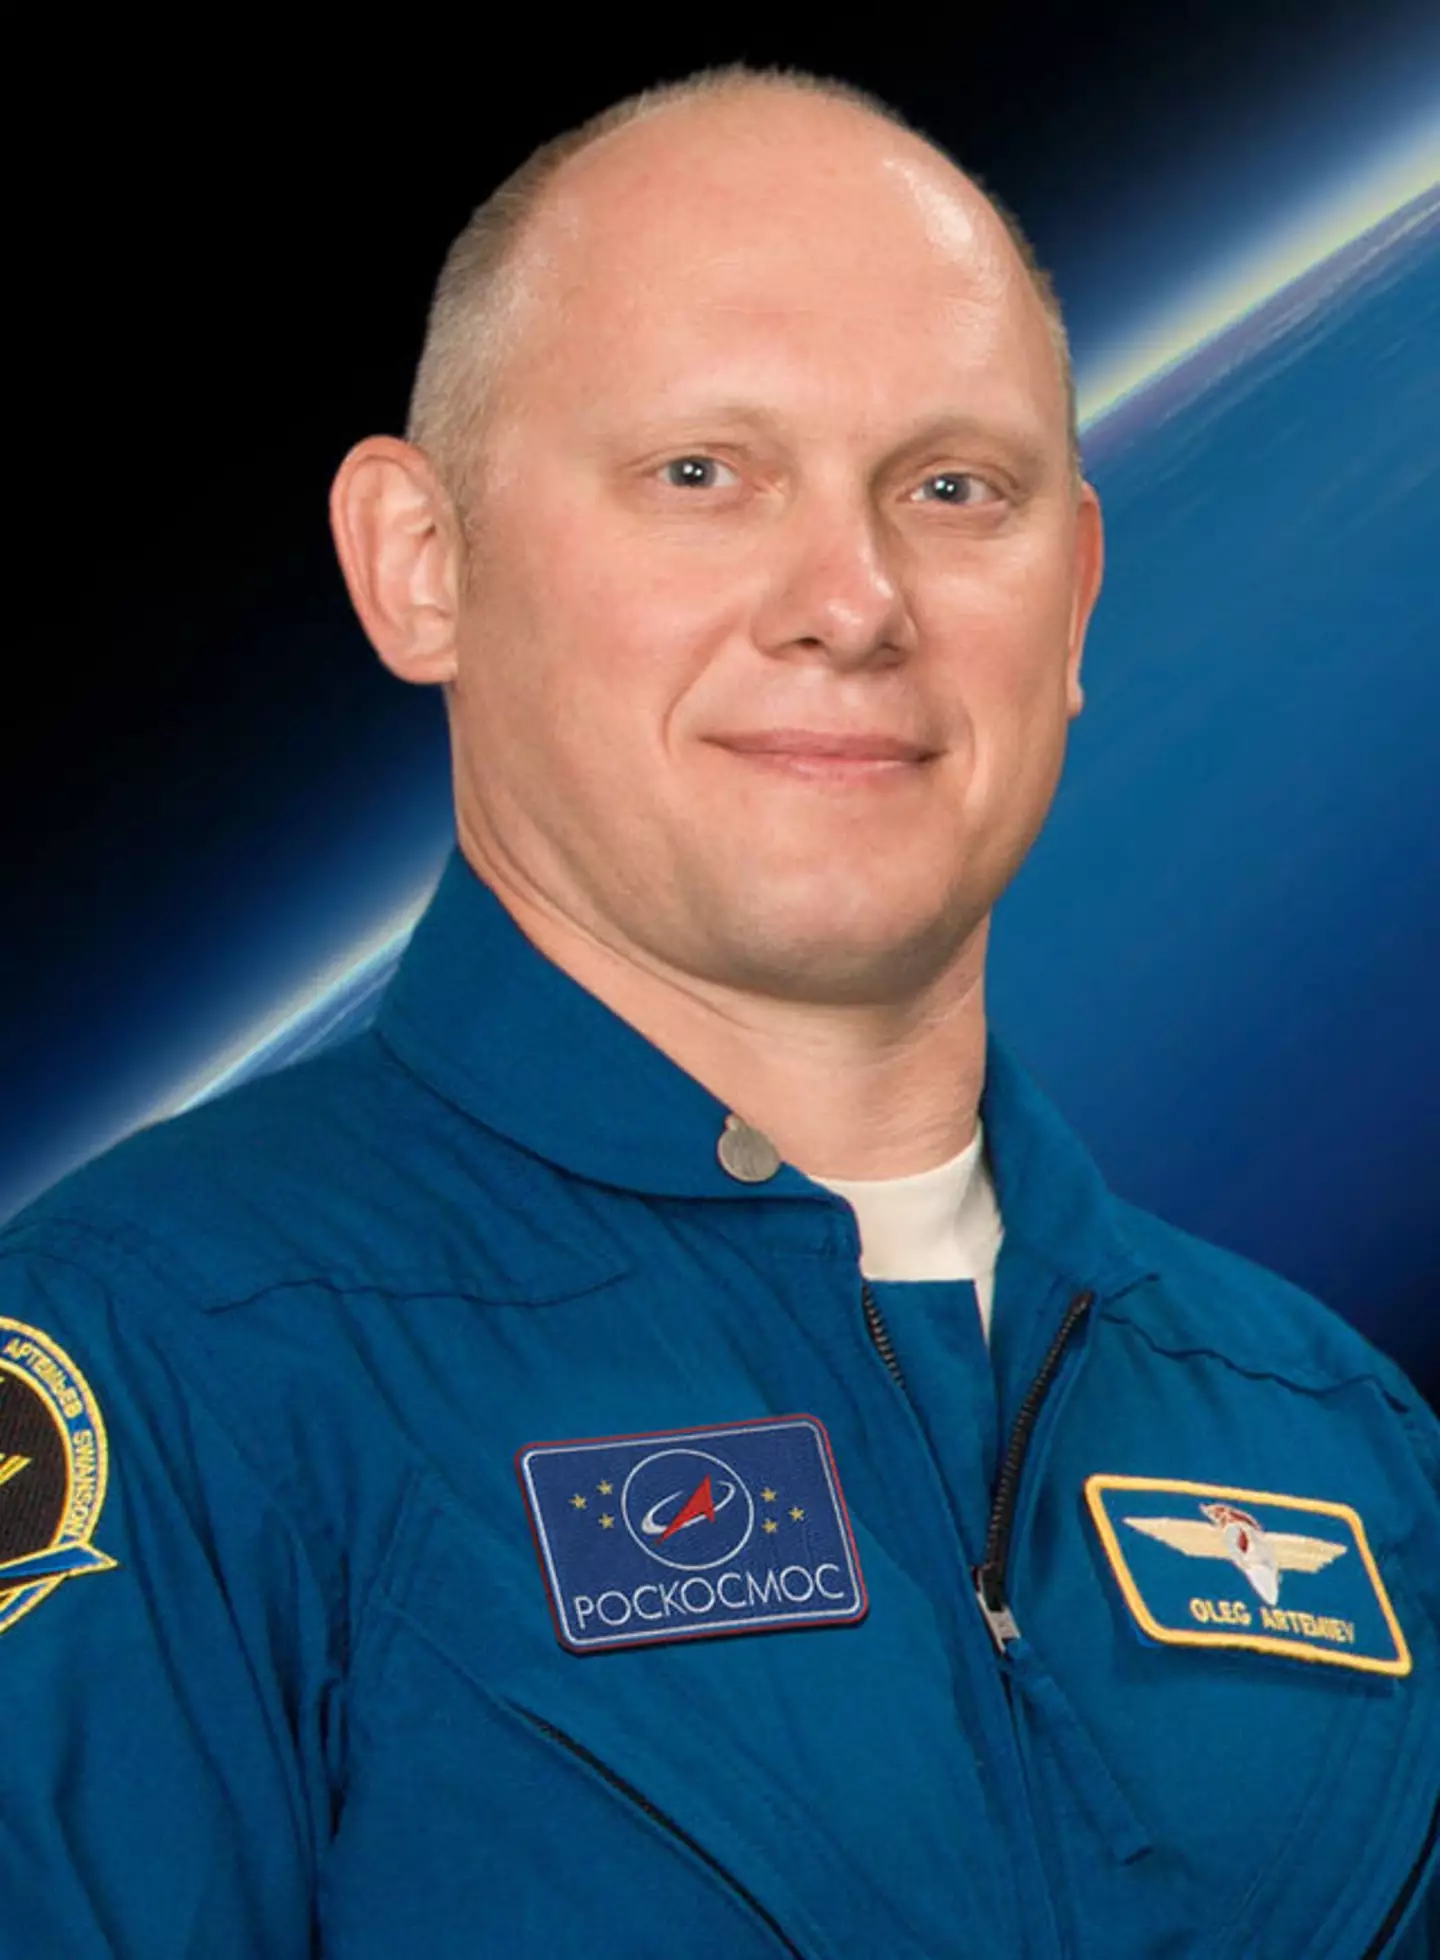 Oleg Artemyev was able to safely return to the ISS.